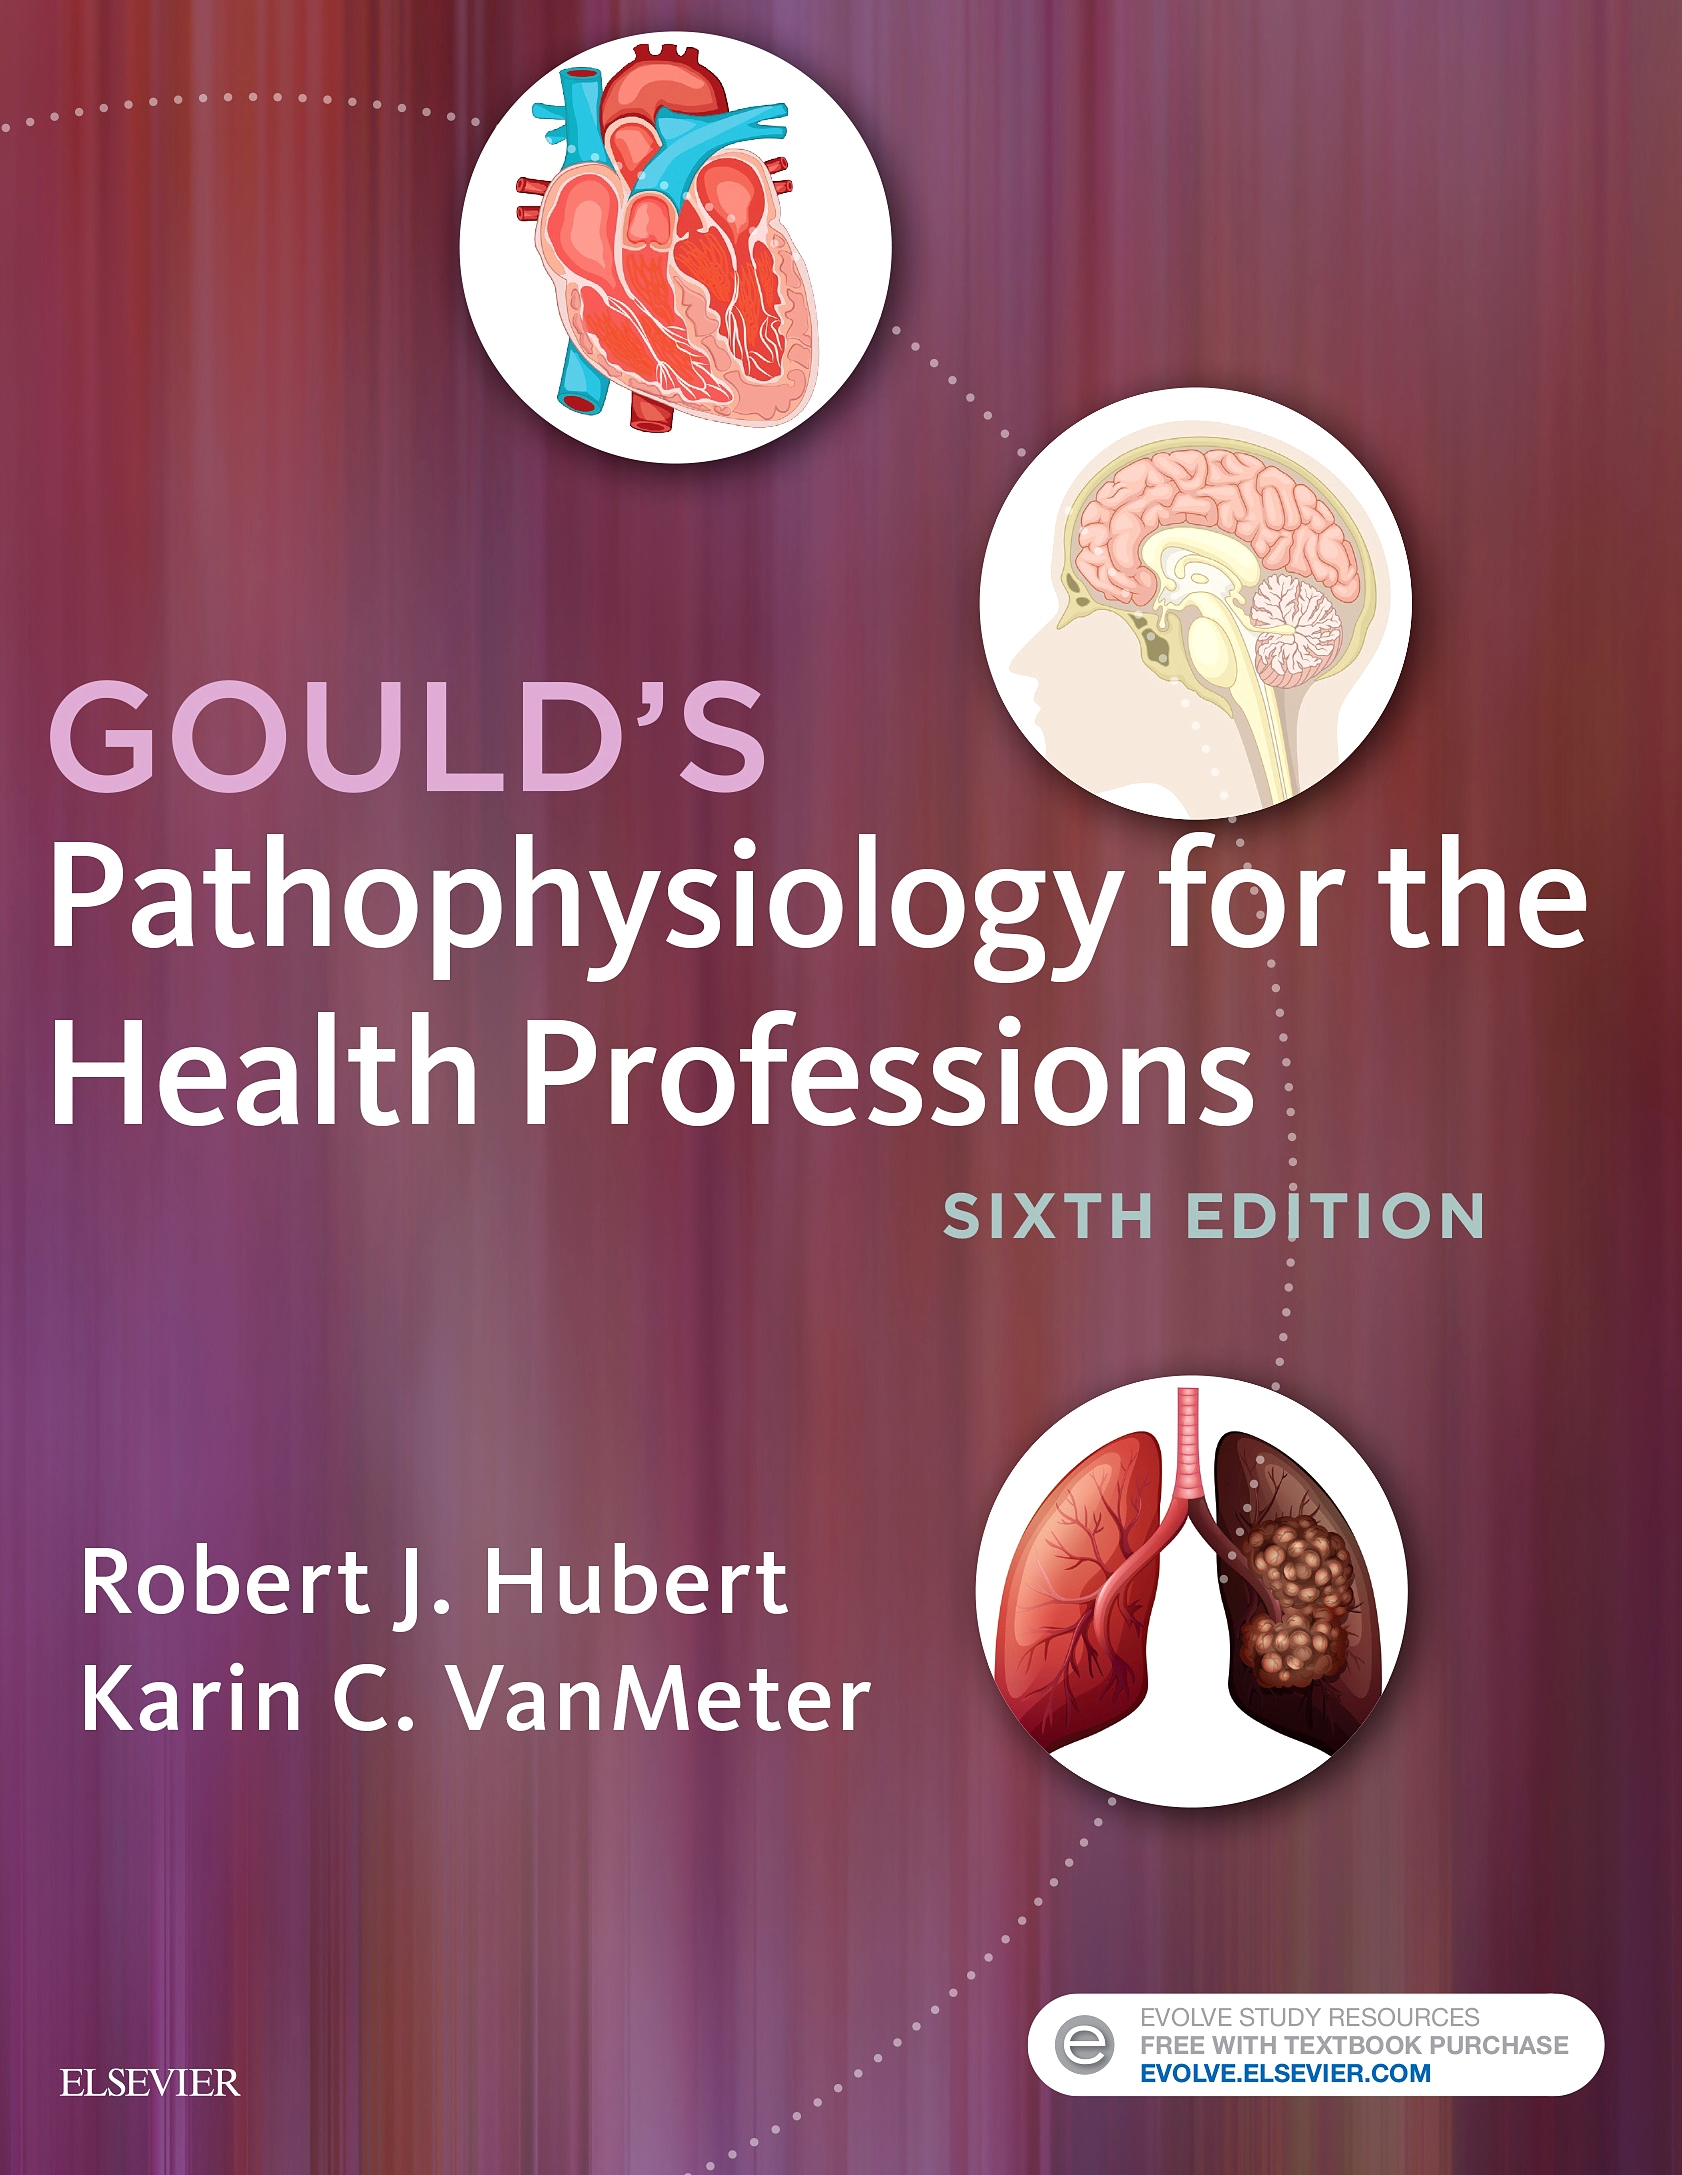 Evolve Resources for Gould's Pathophysiology for the Health Professions, 6th